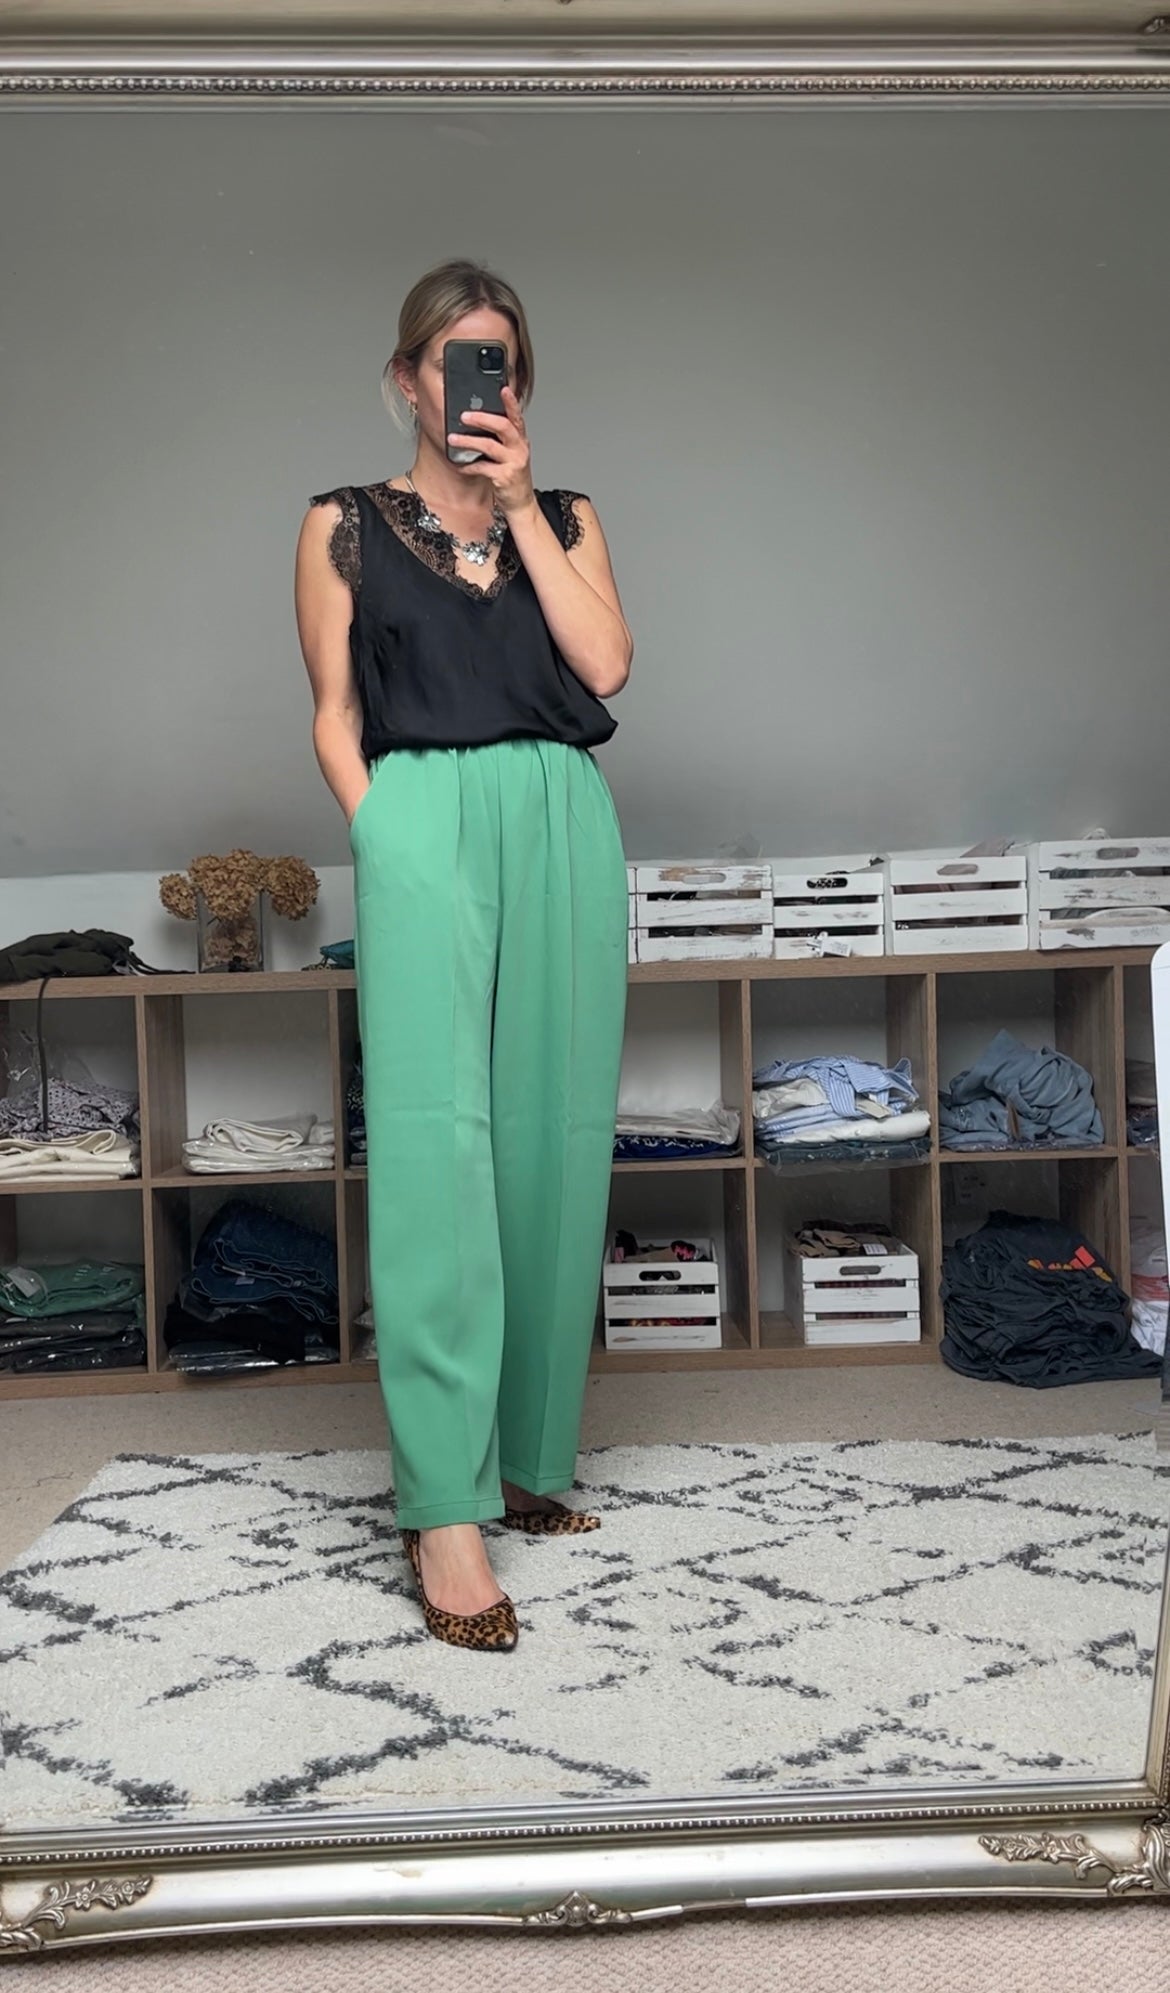 Match trousers in green